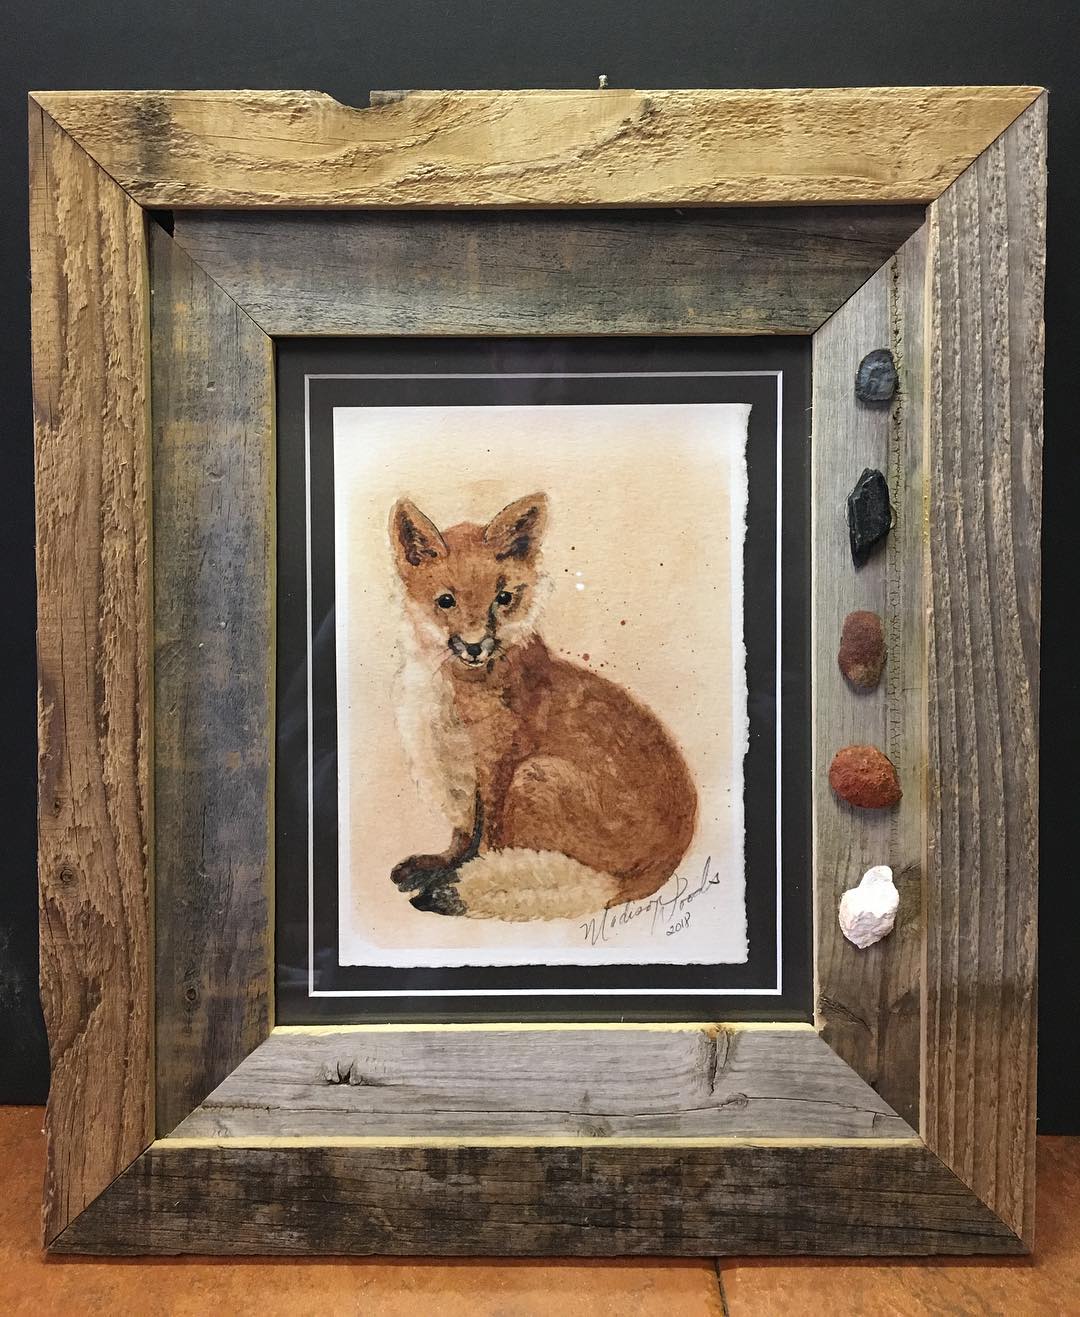 My fox painting, framed in old barnwood with rock pigment specimens.